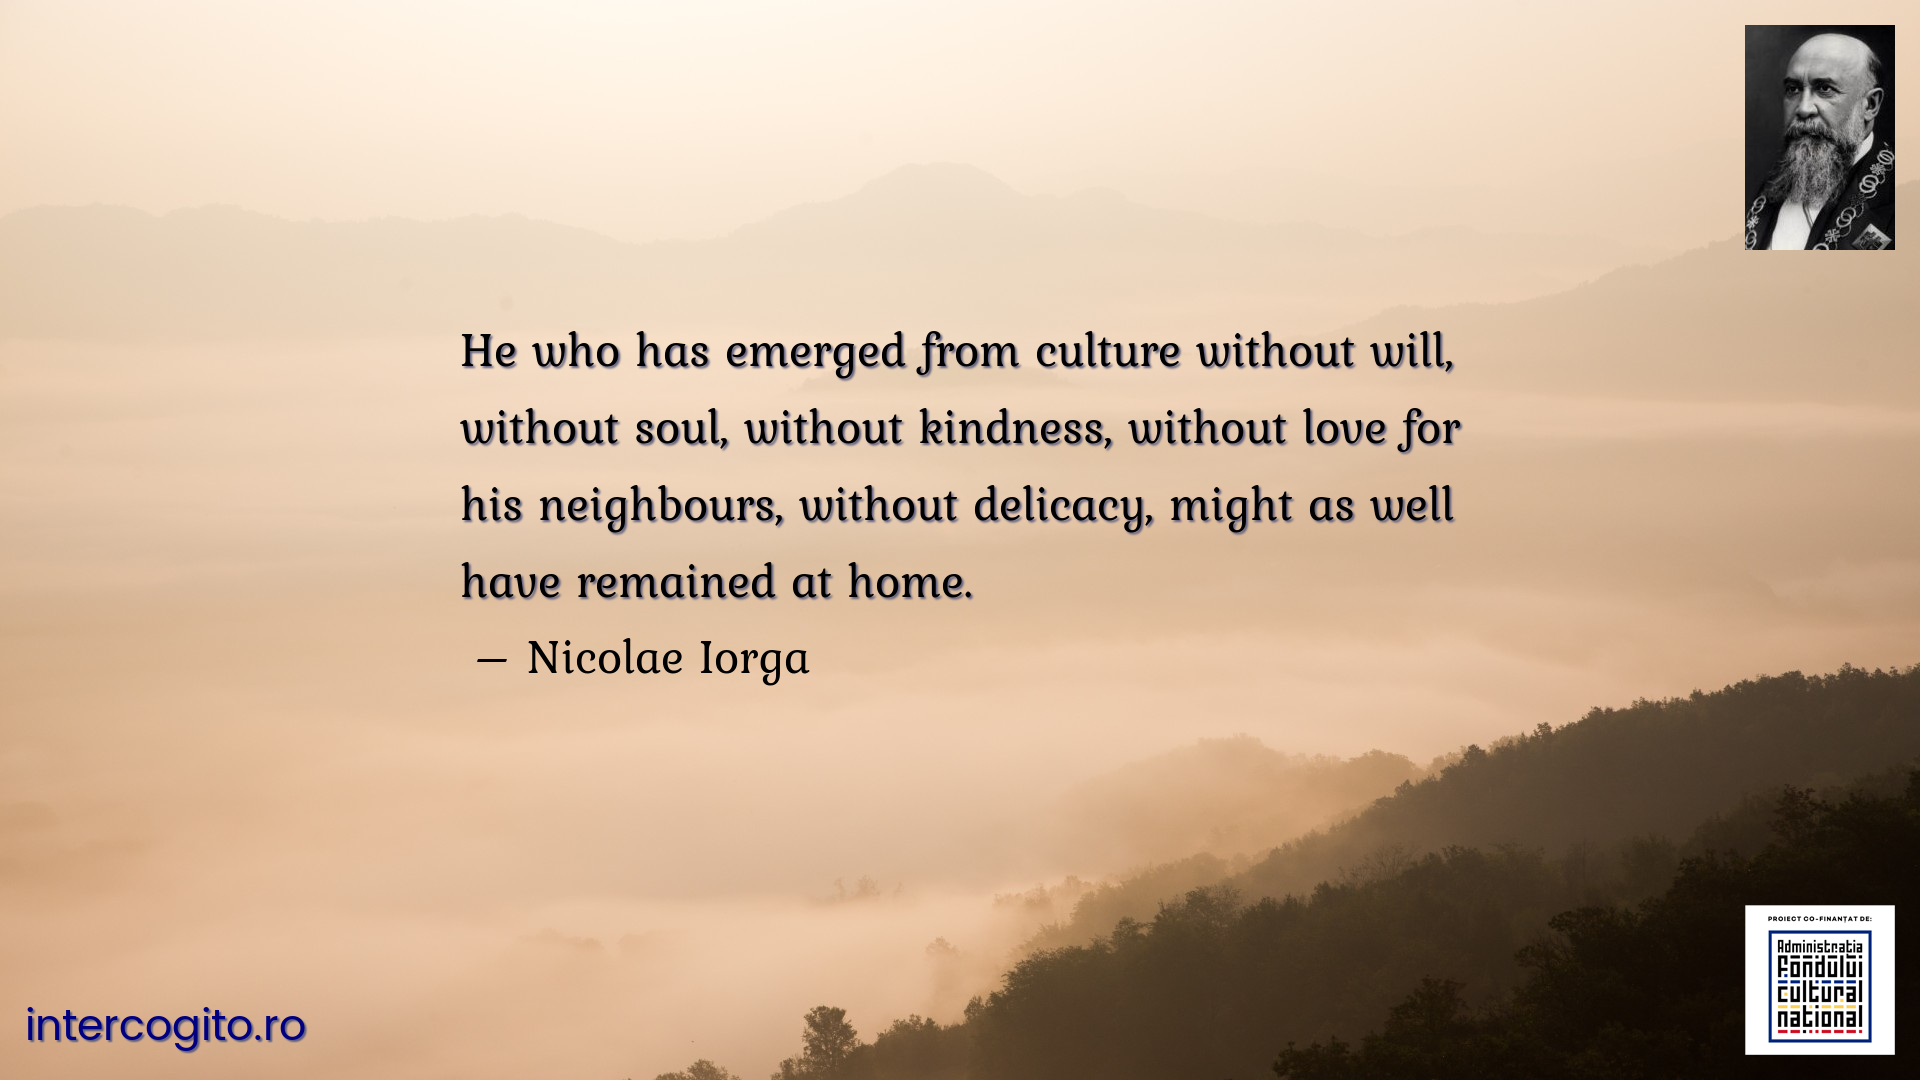 He who has emerged from culture without will, without soul, without kindness, without love for his neighbours, without delicacy, might as well have remained at home.